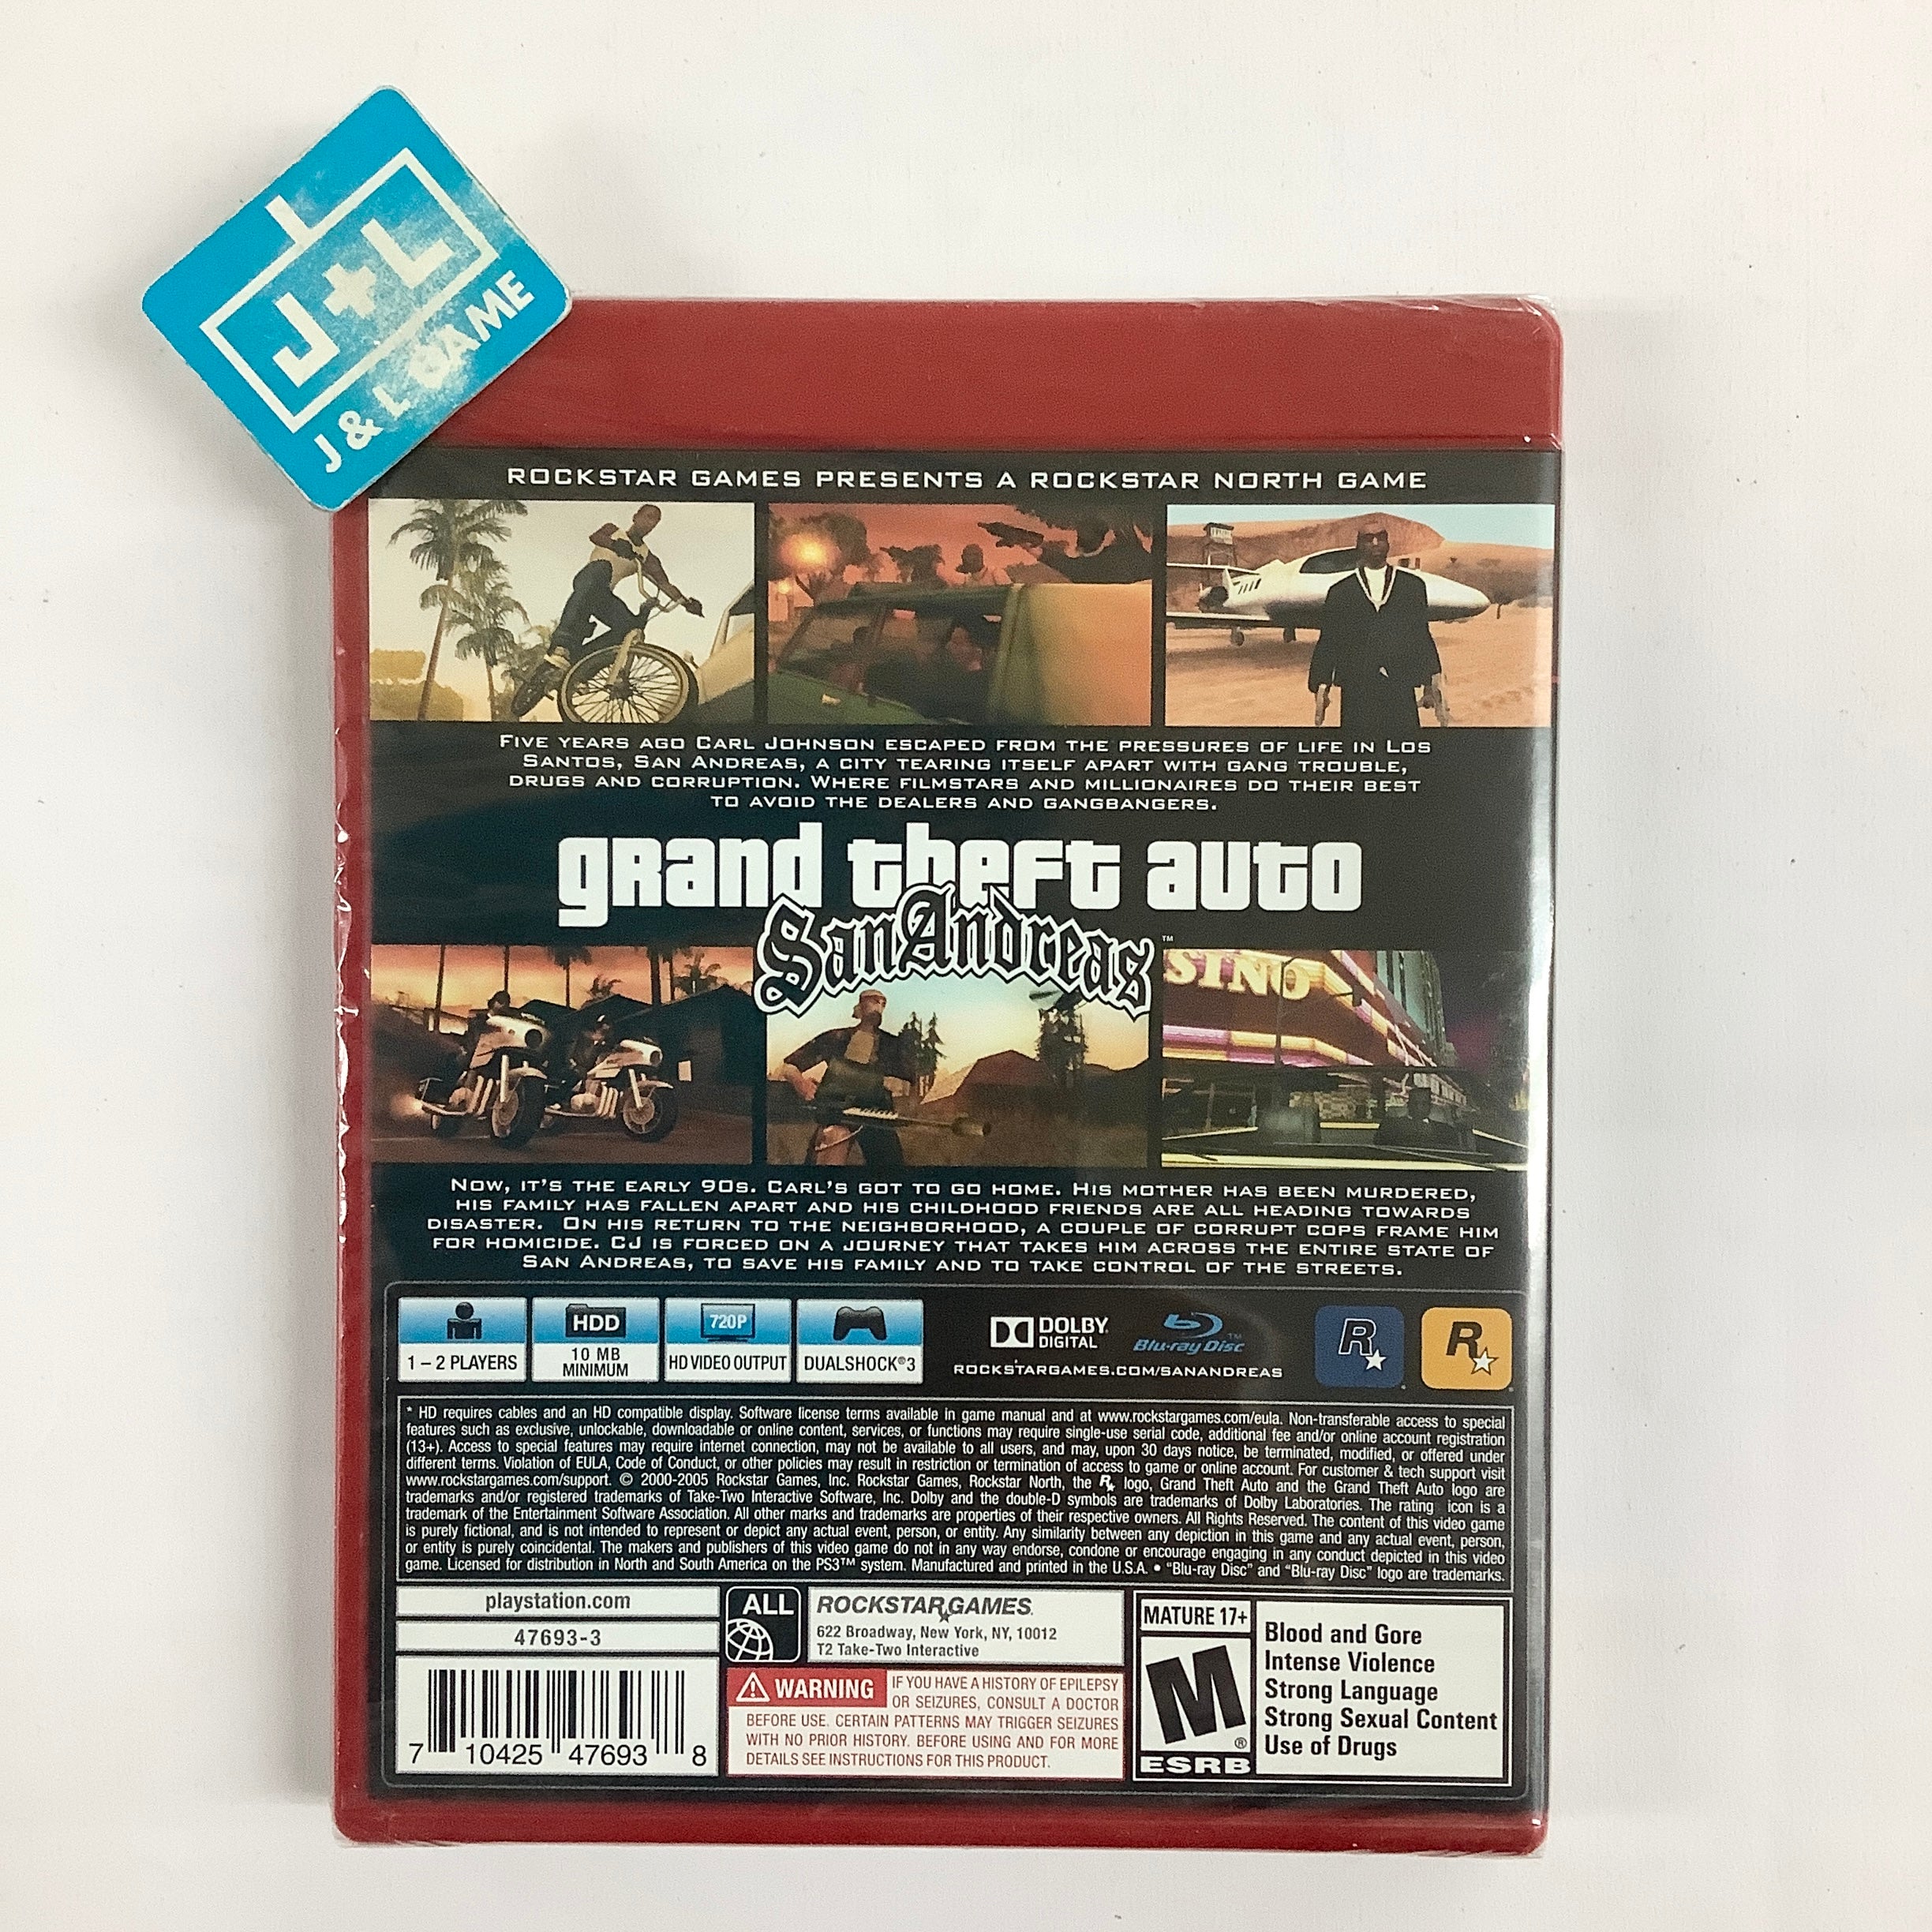 Grand Theft Auto: San Andreas (Greatest Hits) - (PS3) PlayStation 3 Video Games Rockstar Games   